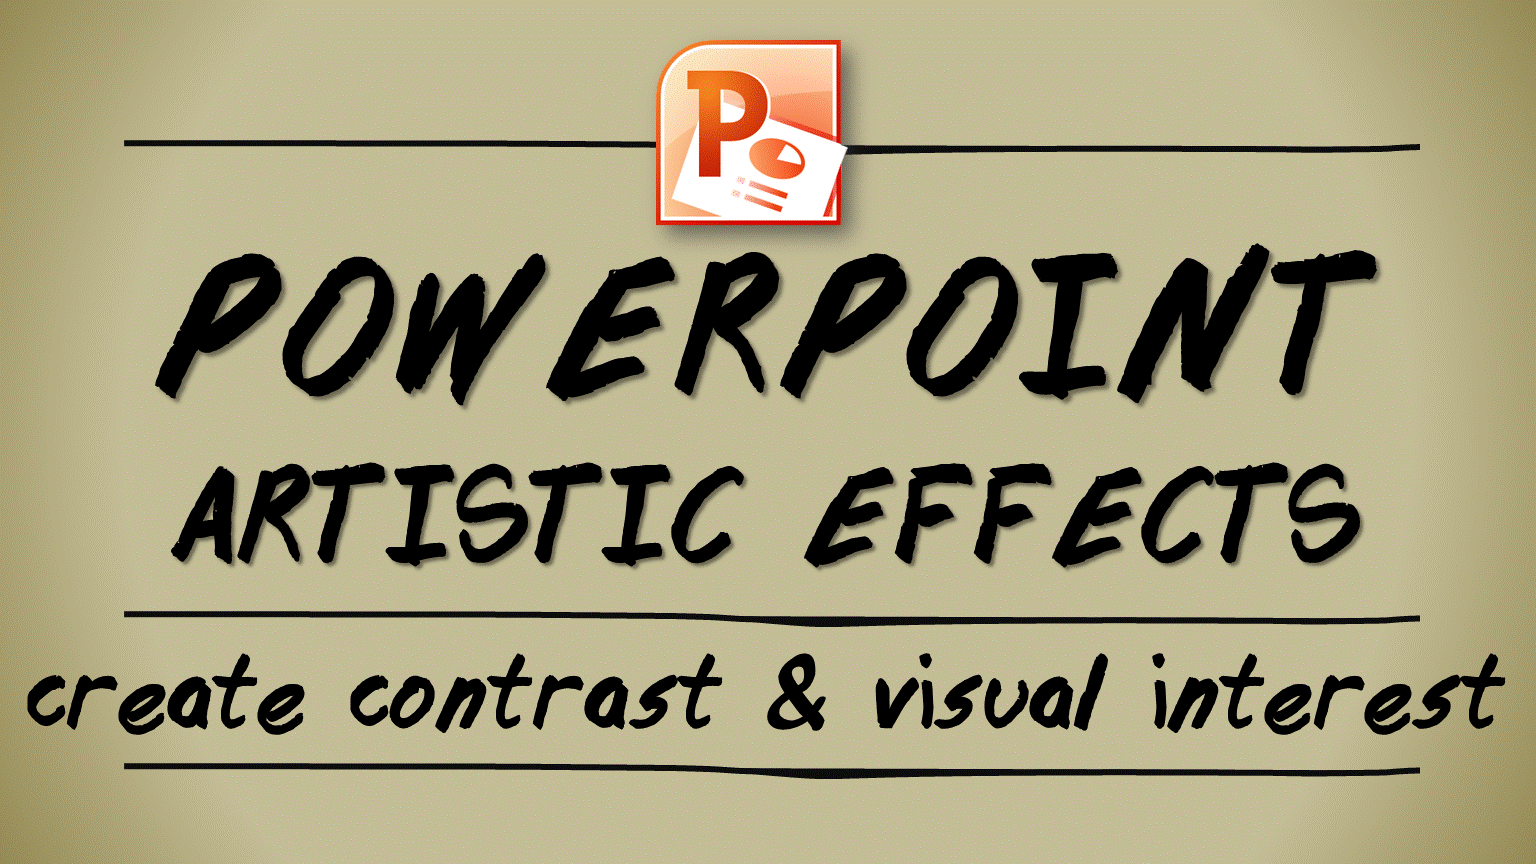 PowerPoint Artistic Effects